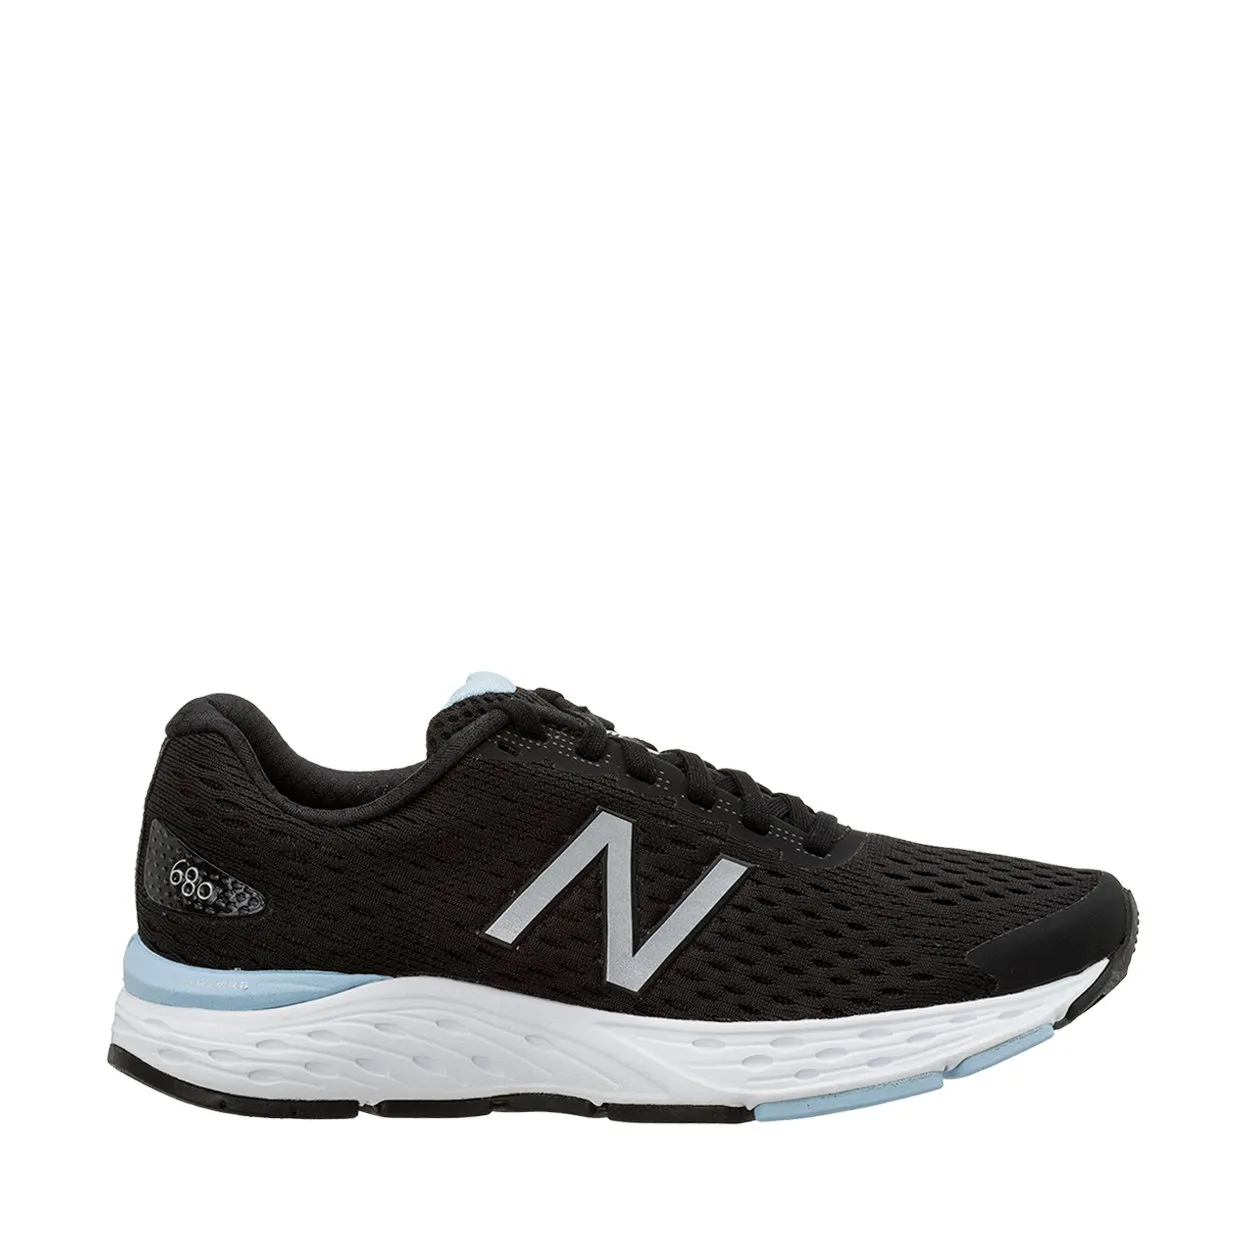 Sneakers New Balance 680v6 in mesh nere